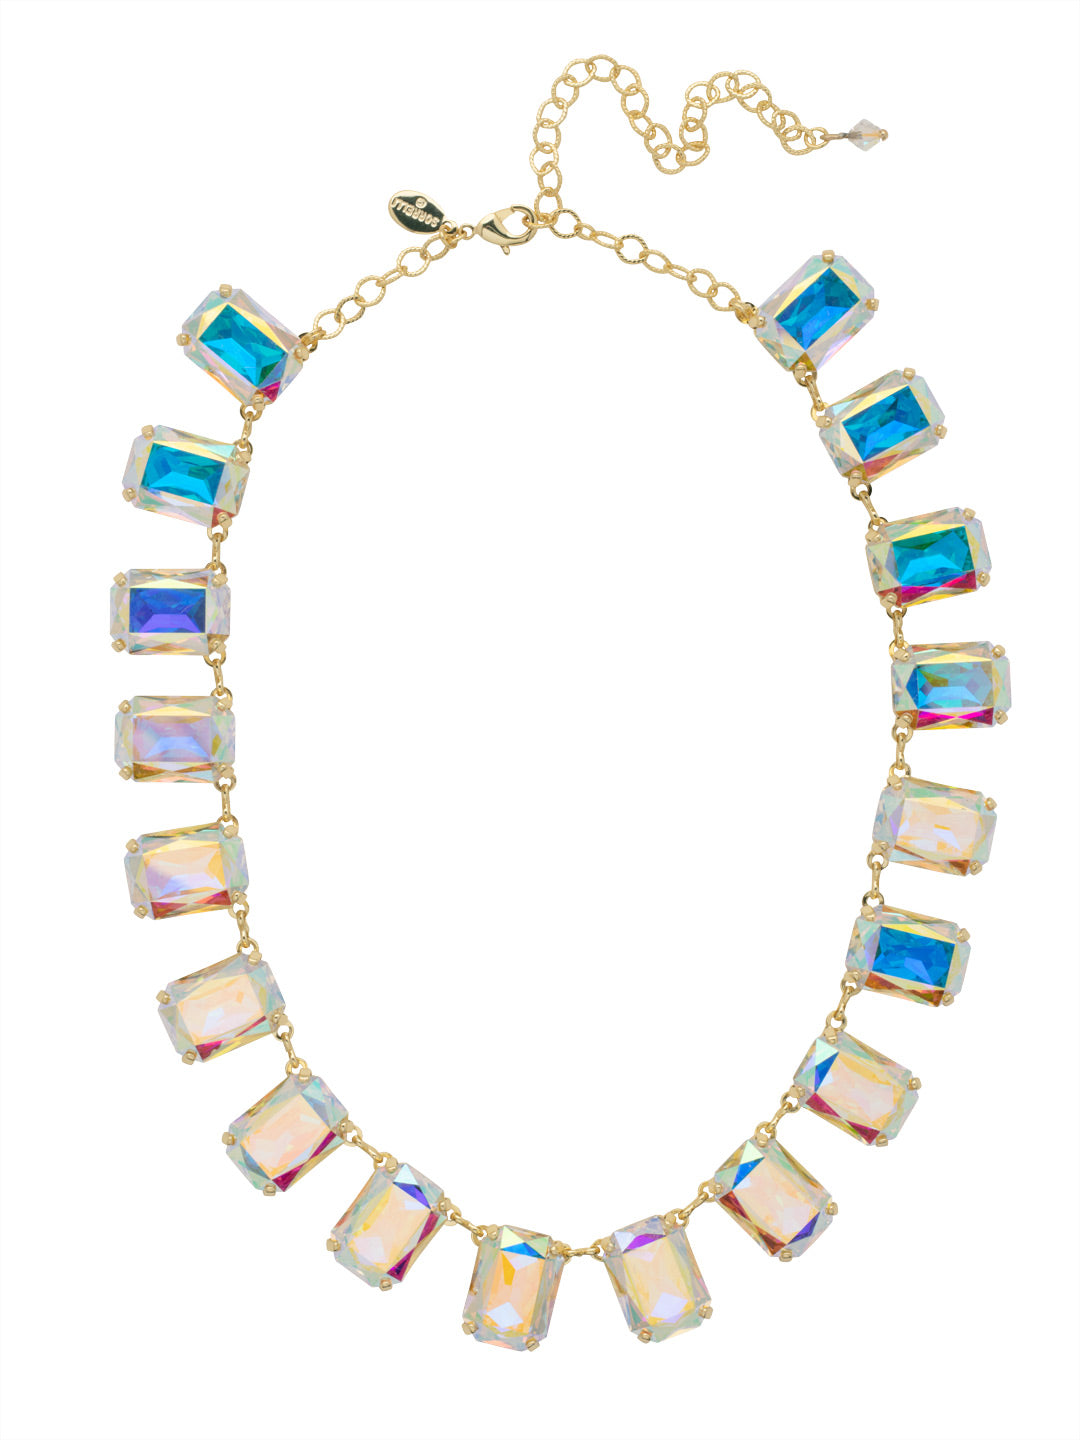 Julianna Emerald Statement Necklace - NFD77BGCAB - <p>The Julianna Emerald Statement Necklace features a row of octagon cut candy drop crystals around an adjustable chain, secured with a lobster claw clasp. From Sorrelli's Crystal Aurora Borealis collection in our Bright Gold-tone finish.</p>